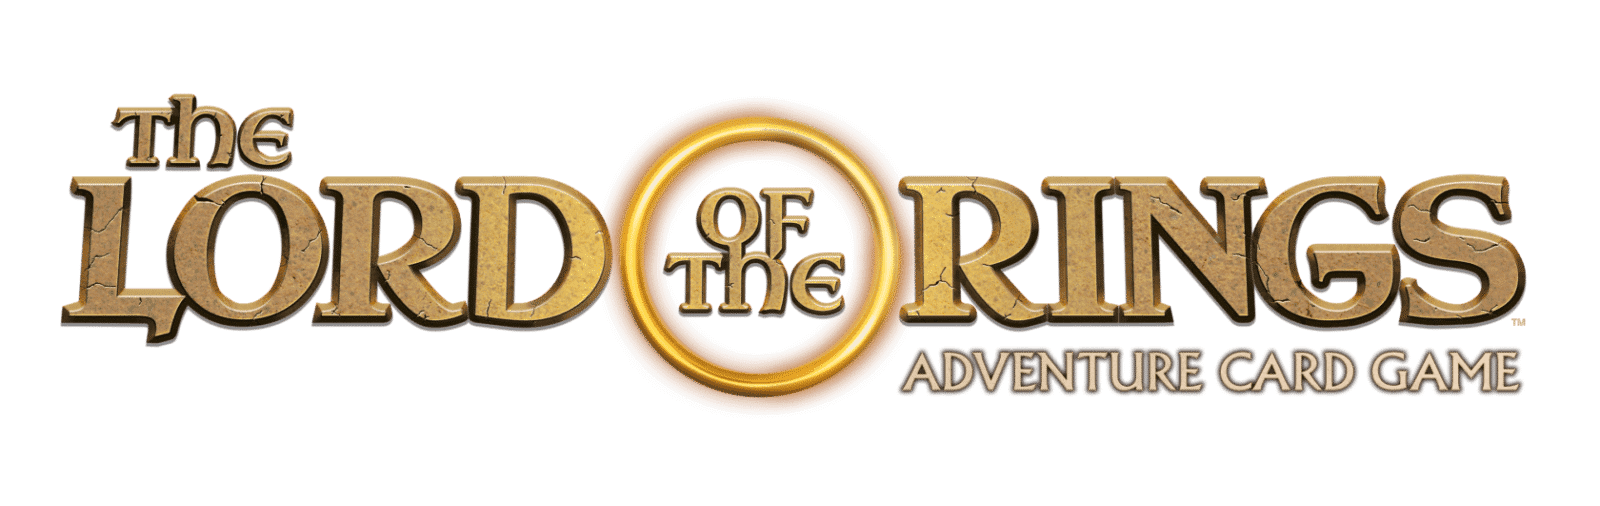 The Lord of the Rings: Adventure Card Game Logo